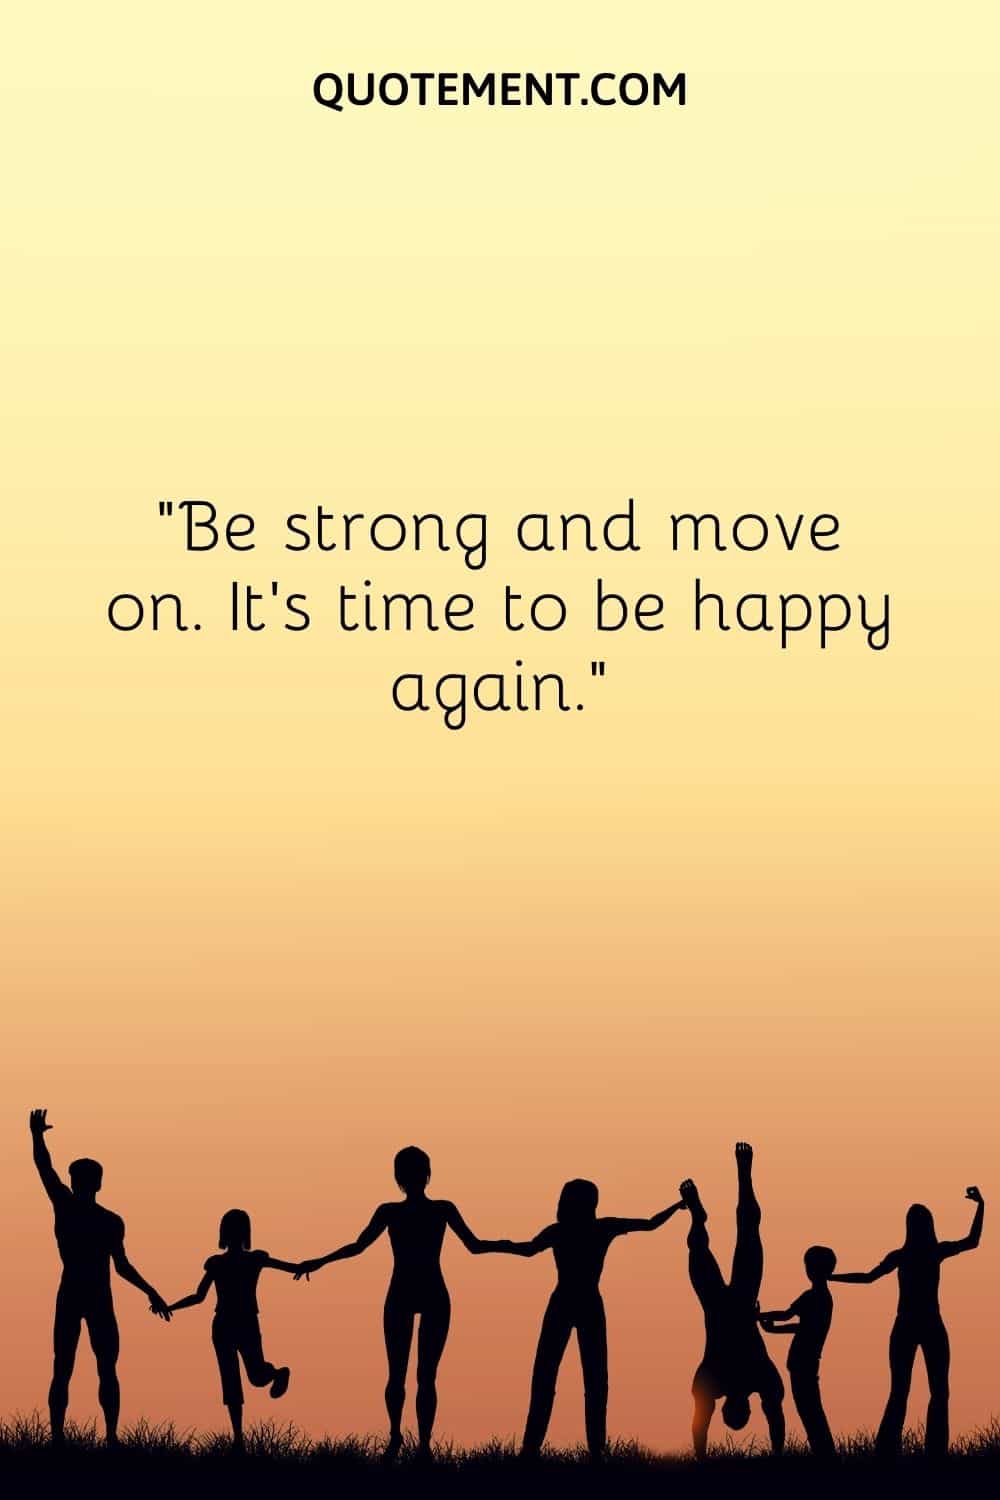 Be strong and move on. It’s time to be happy again